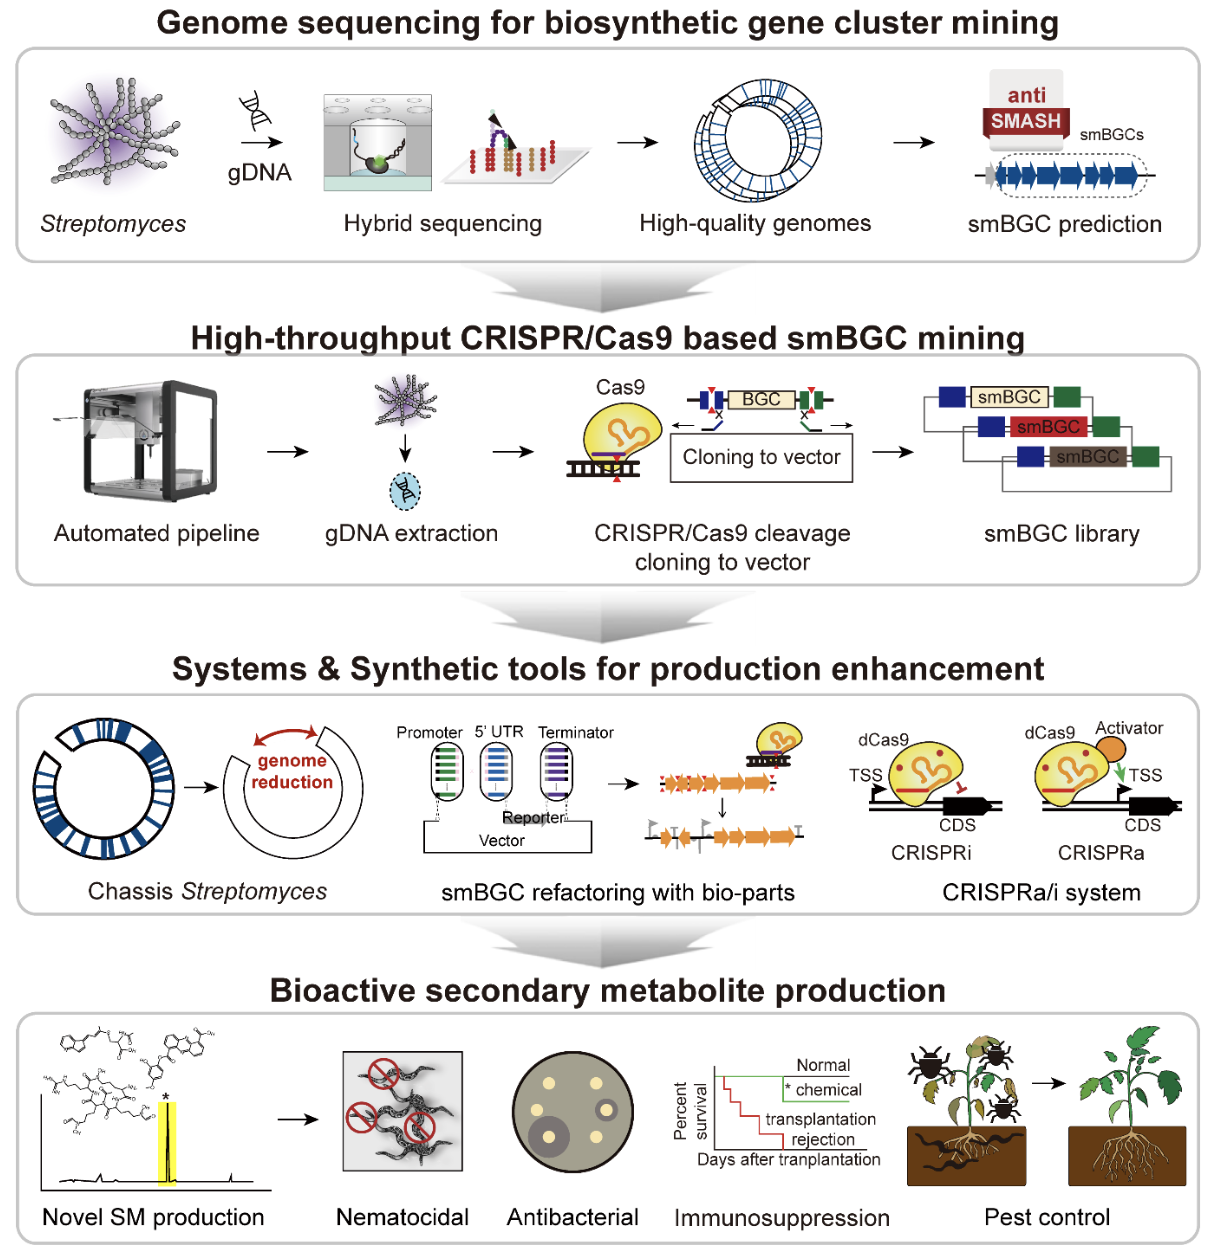 Fig 1. Bioactive secondary metabolite mining strategy using systems & synthetic biology tools in Streptomyces